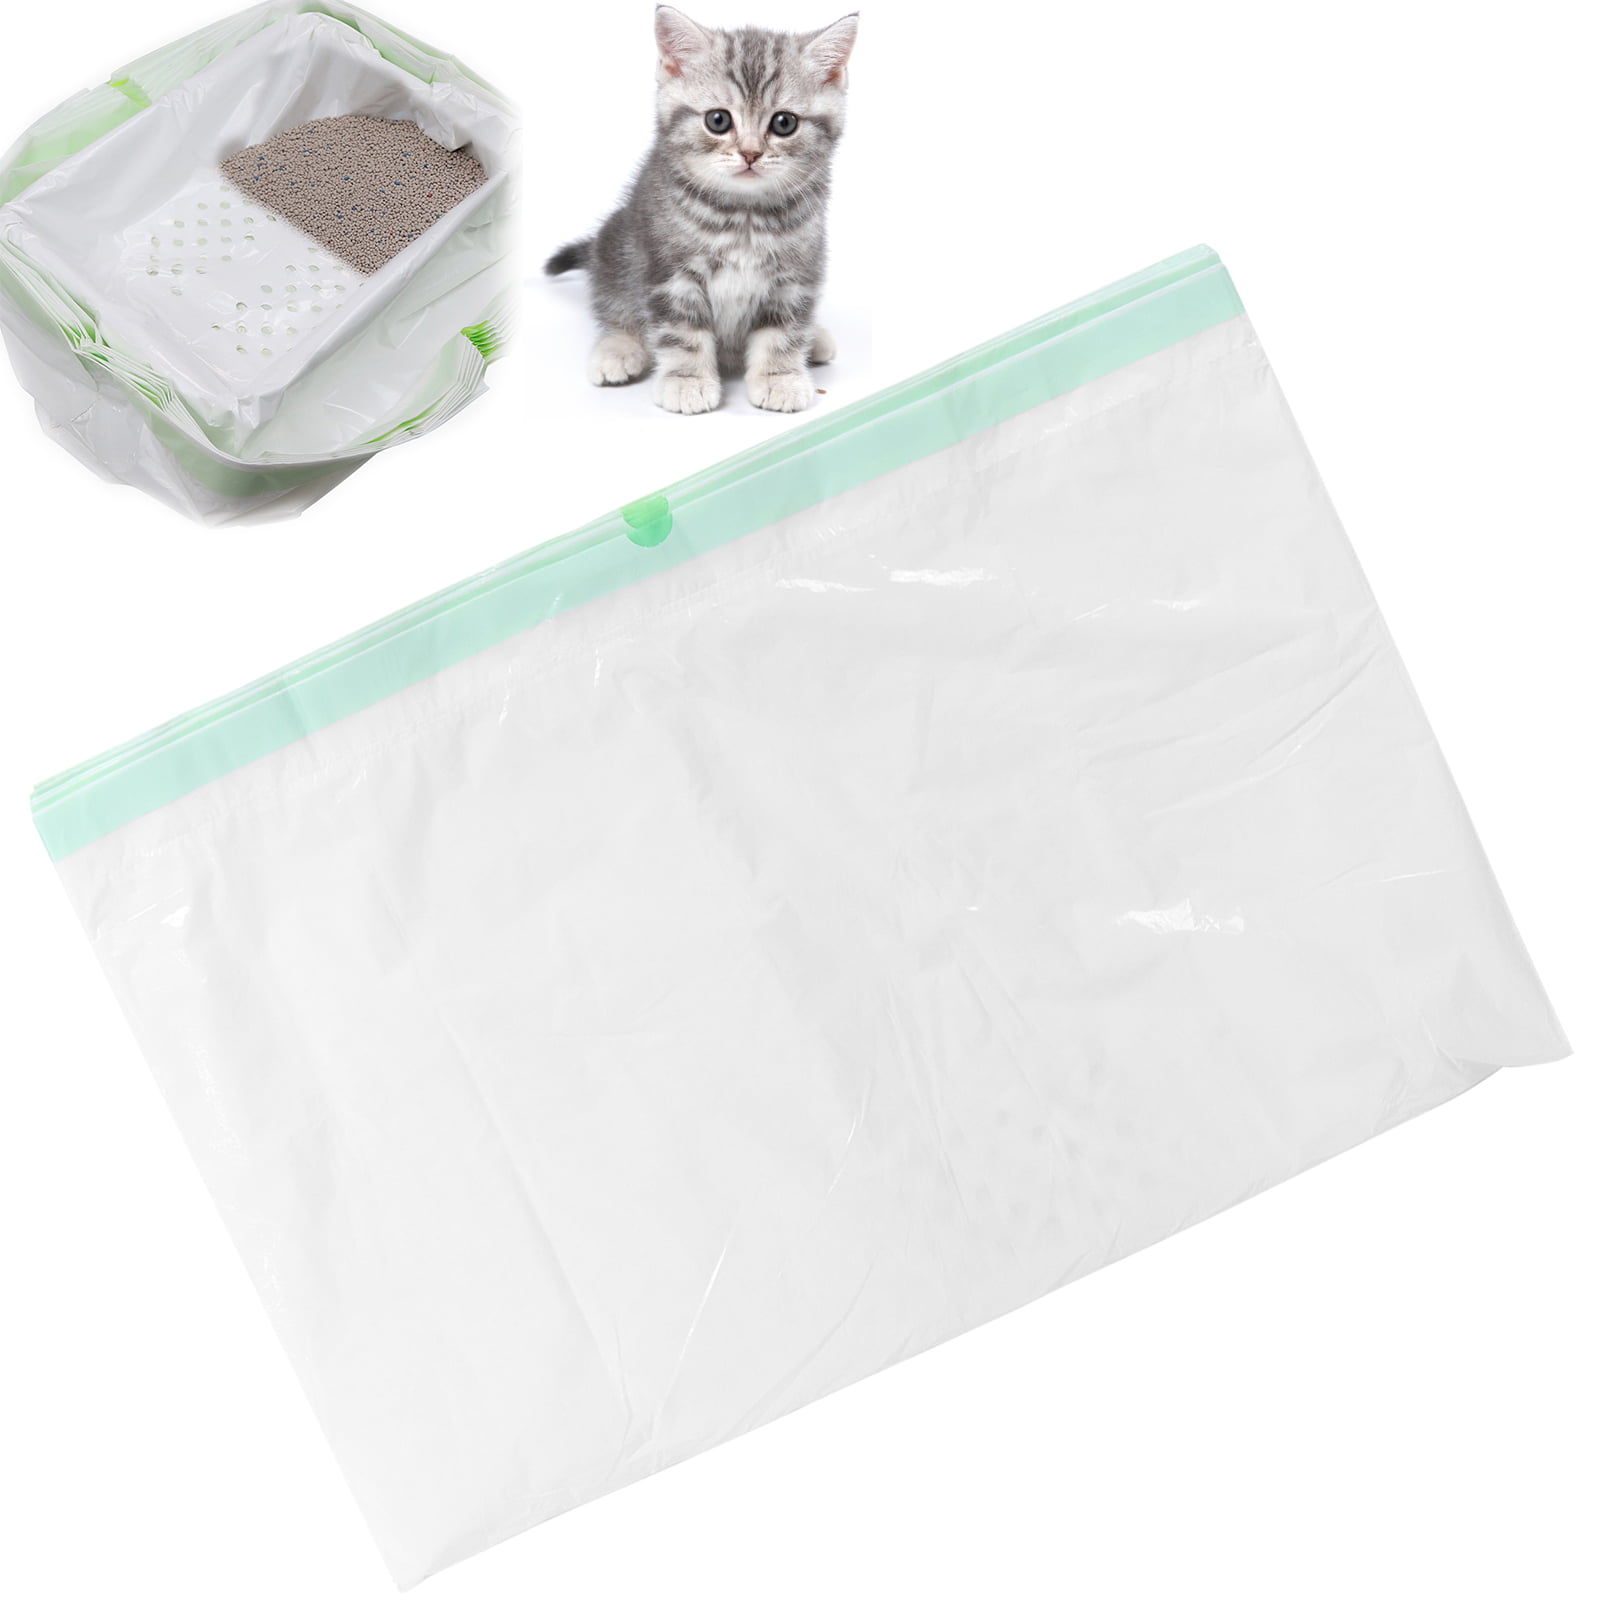 Find Durable Wholesale thailand cat sand Products - Alibaba.com